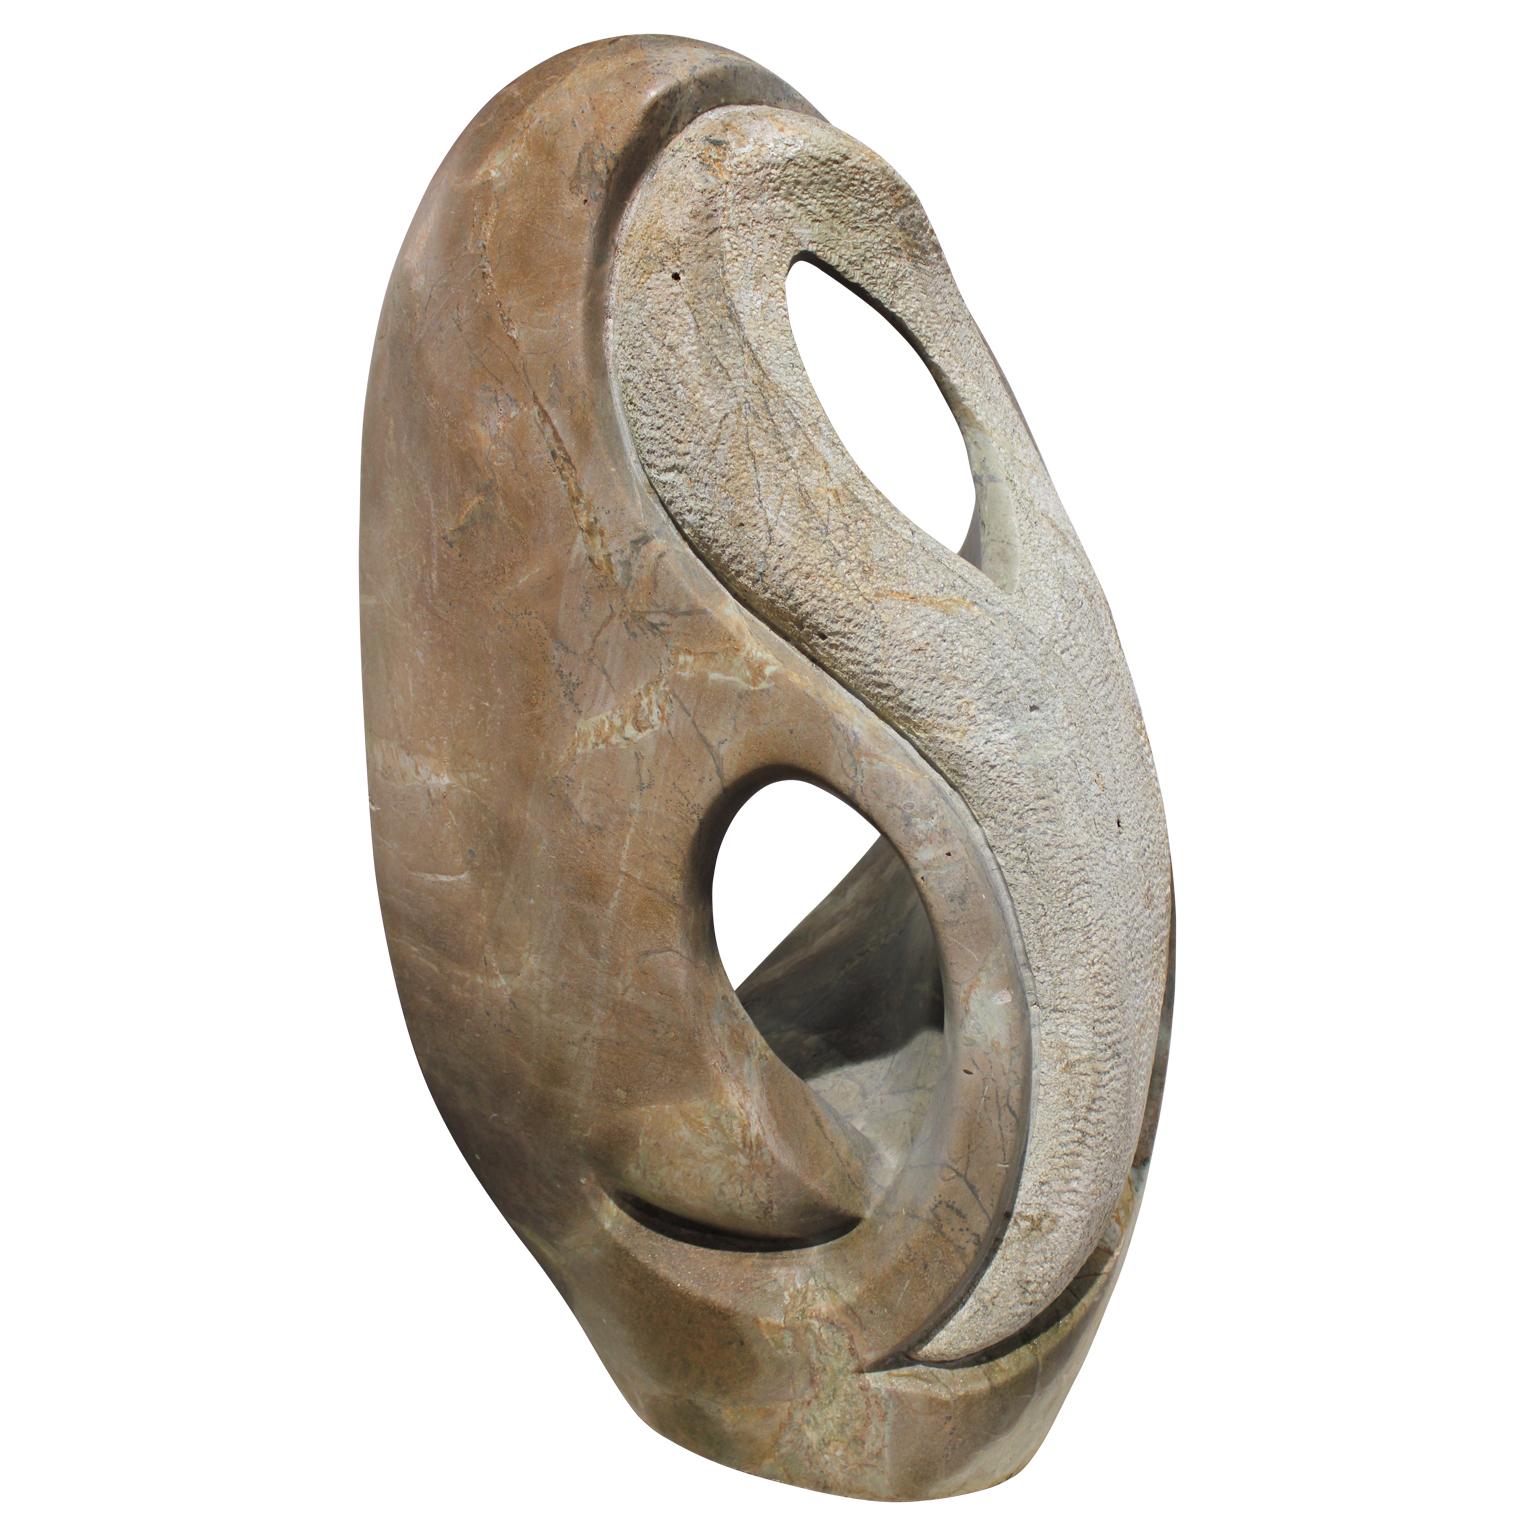 Large Organic Swirling Sculpture with Raw Natural Stone and Polished Stone - Brown Abstract Sculpture by Jose Zacarias